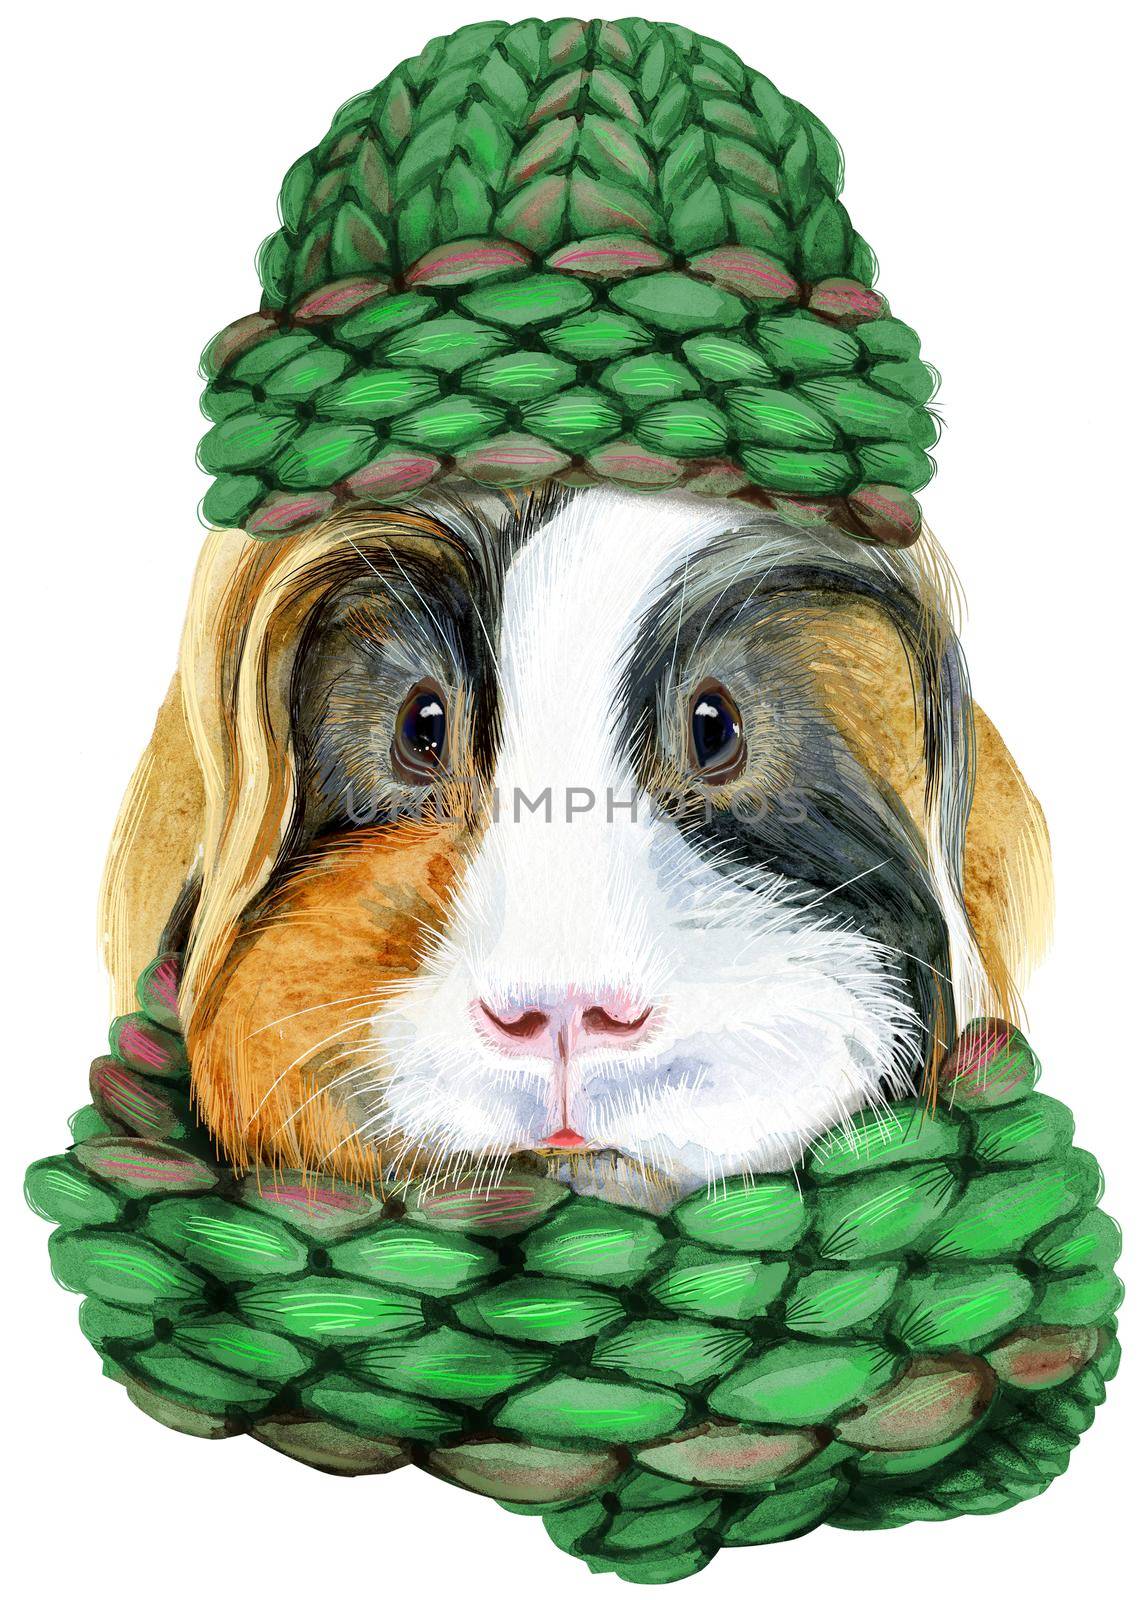 Guinea pig pig in a green knitted hat and scarf. Pig for T-shirt graphics. Watercolor Sheltie guinea pig illustration